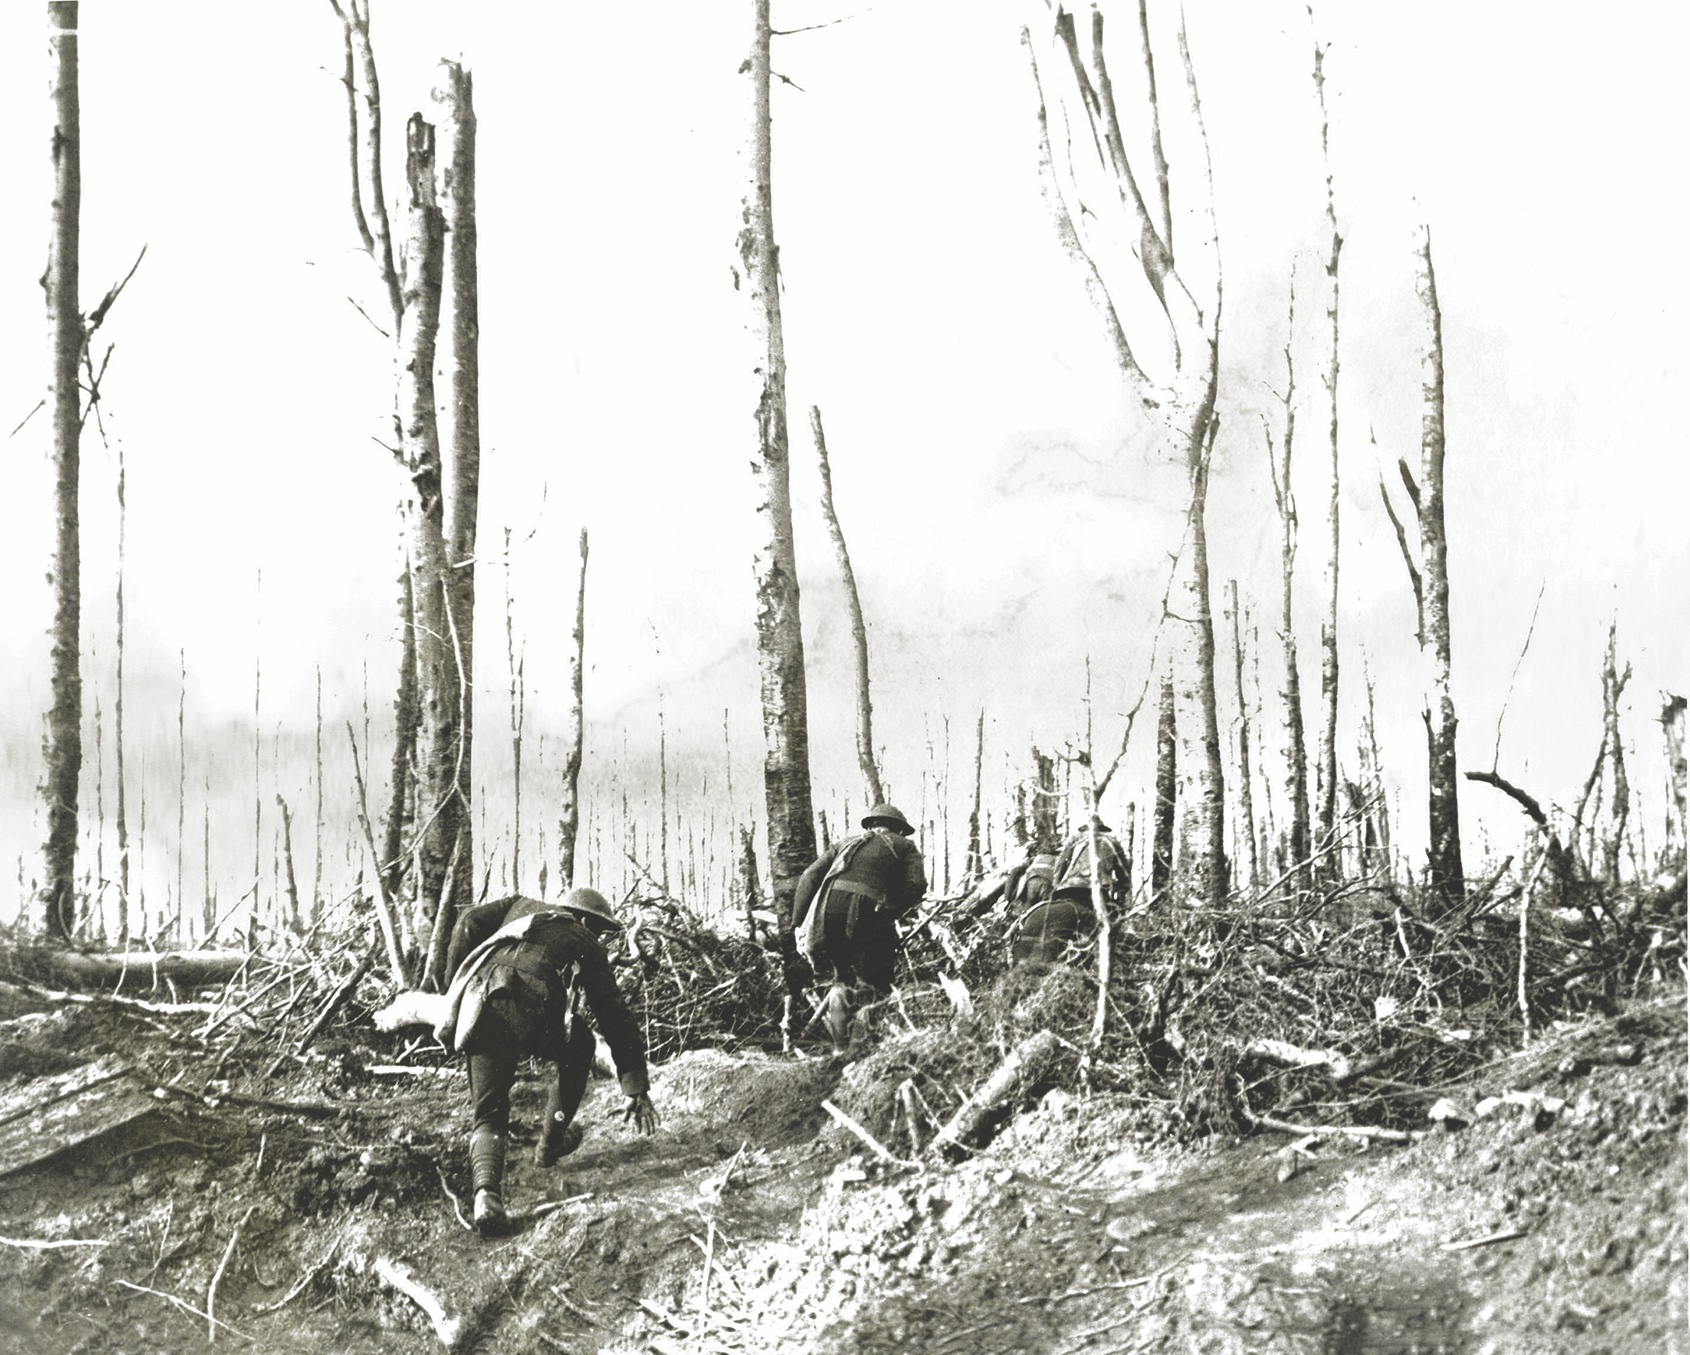 U.S. Marines make their way through a cratered battlefield in the Meuse-Argonne Offensive. (U.S. Marine Corps History Division)